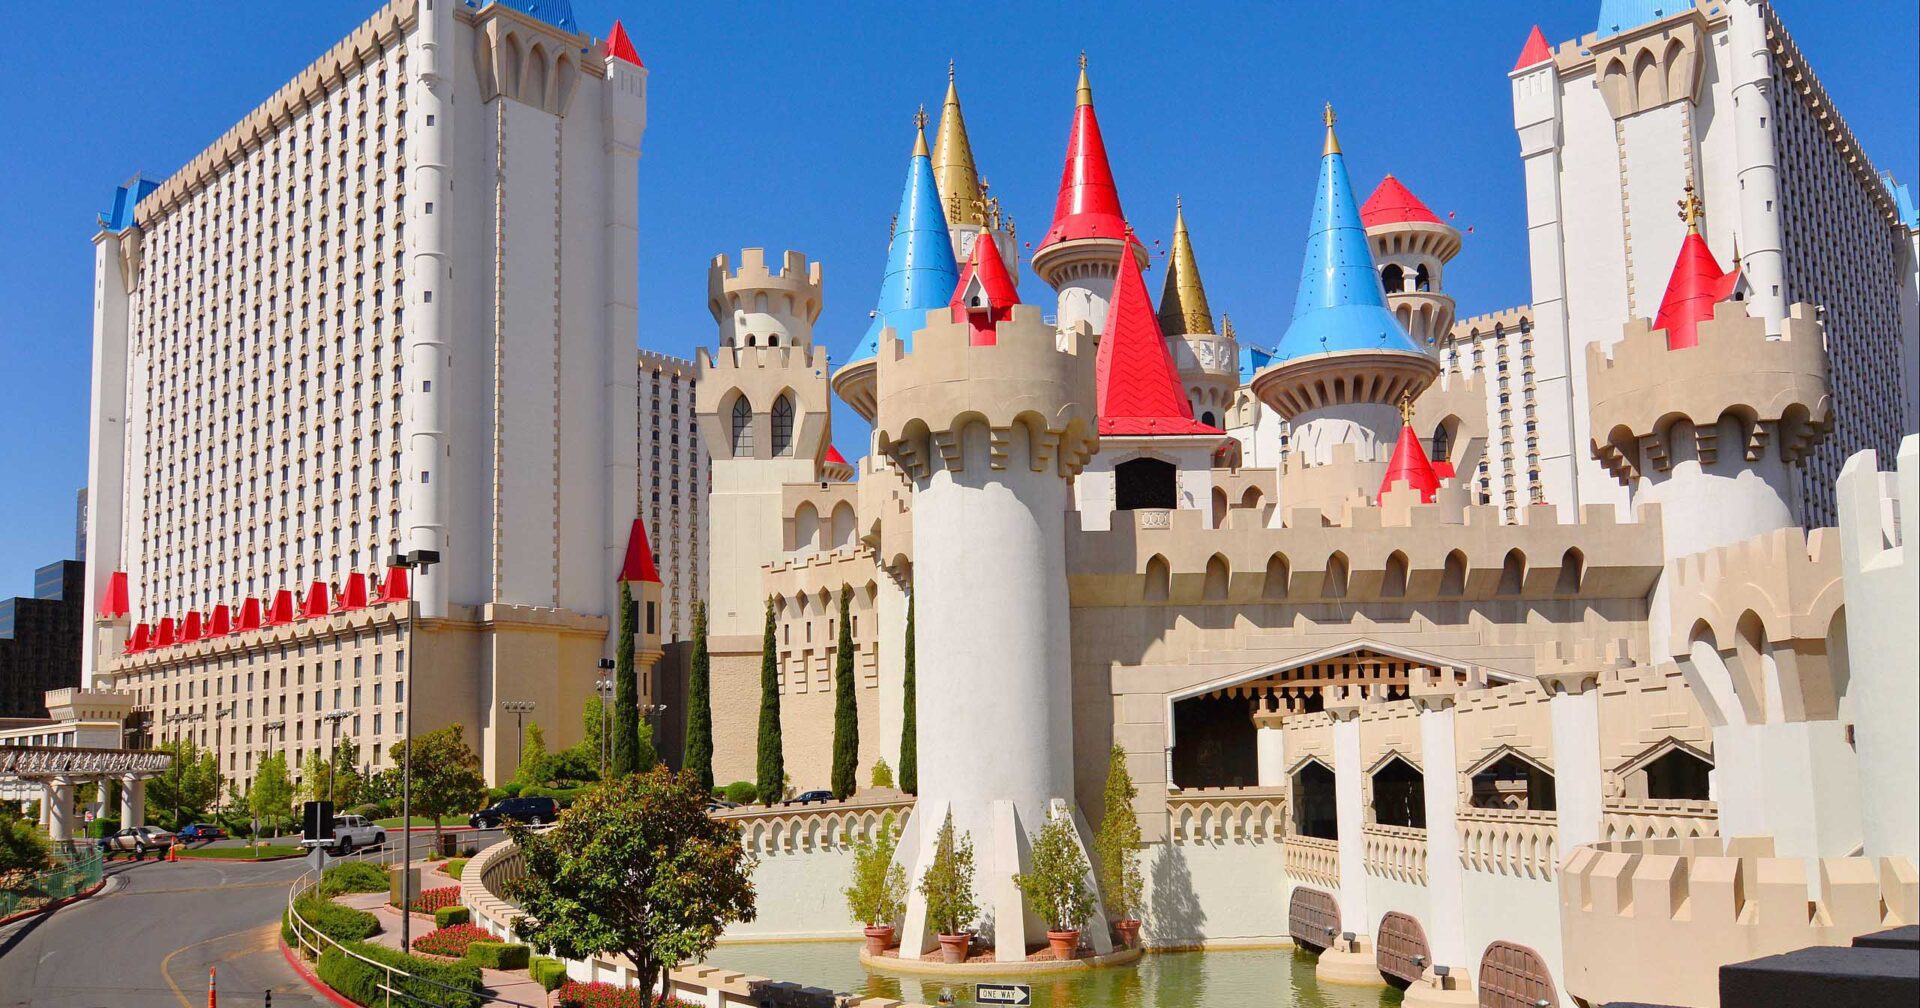 Excalibur Las Vegas Hotels - Great budget option on the Strip